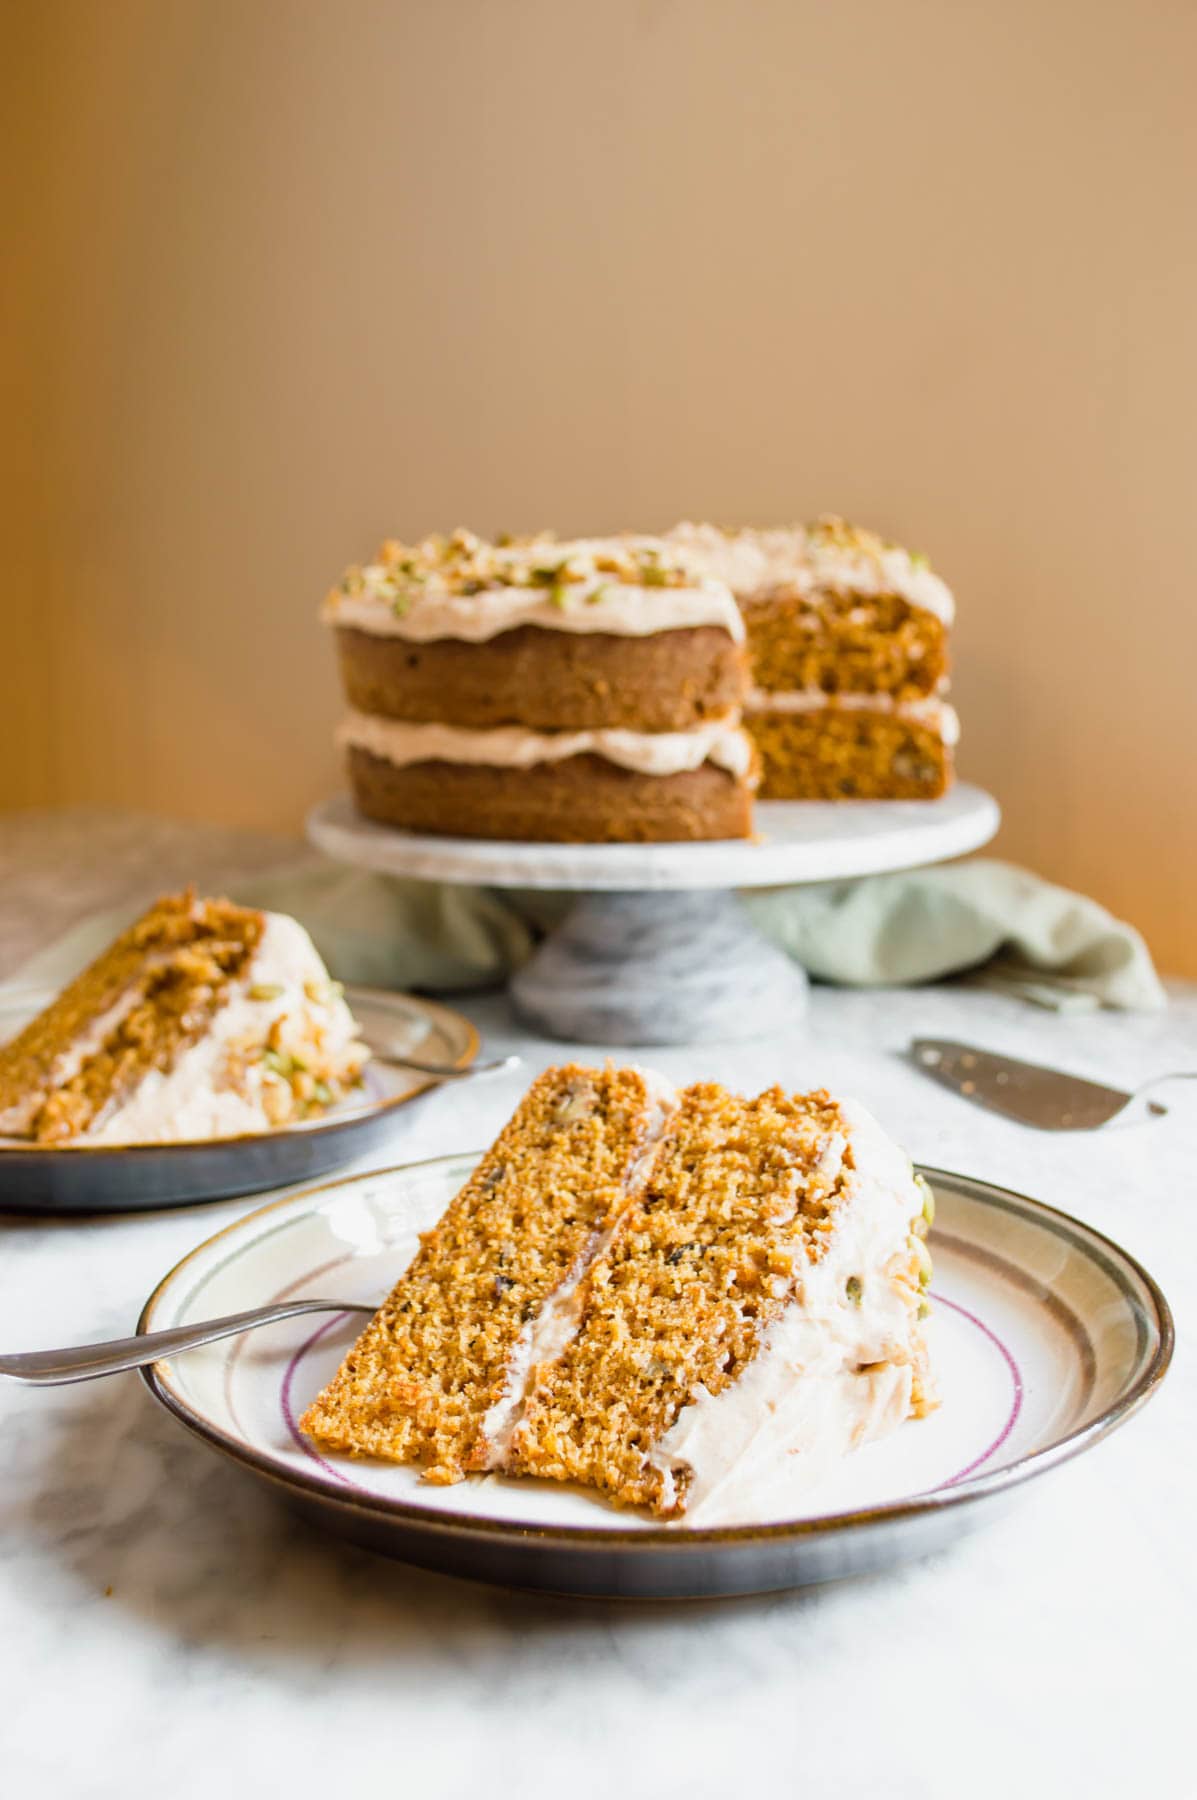 Slices of Carrot Cake with Chai Spiced Frosting on plates and cake on cake stand in background.